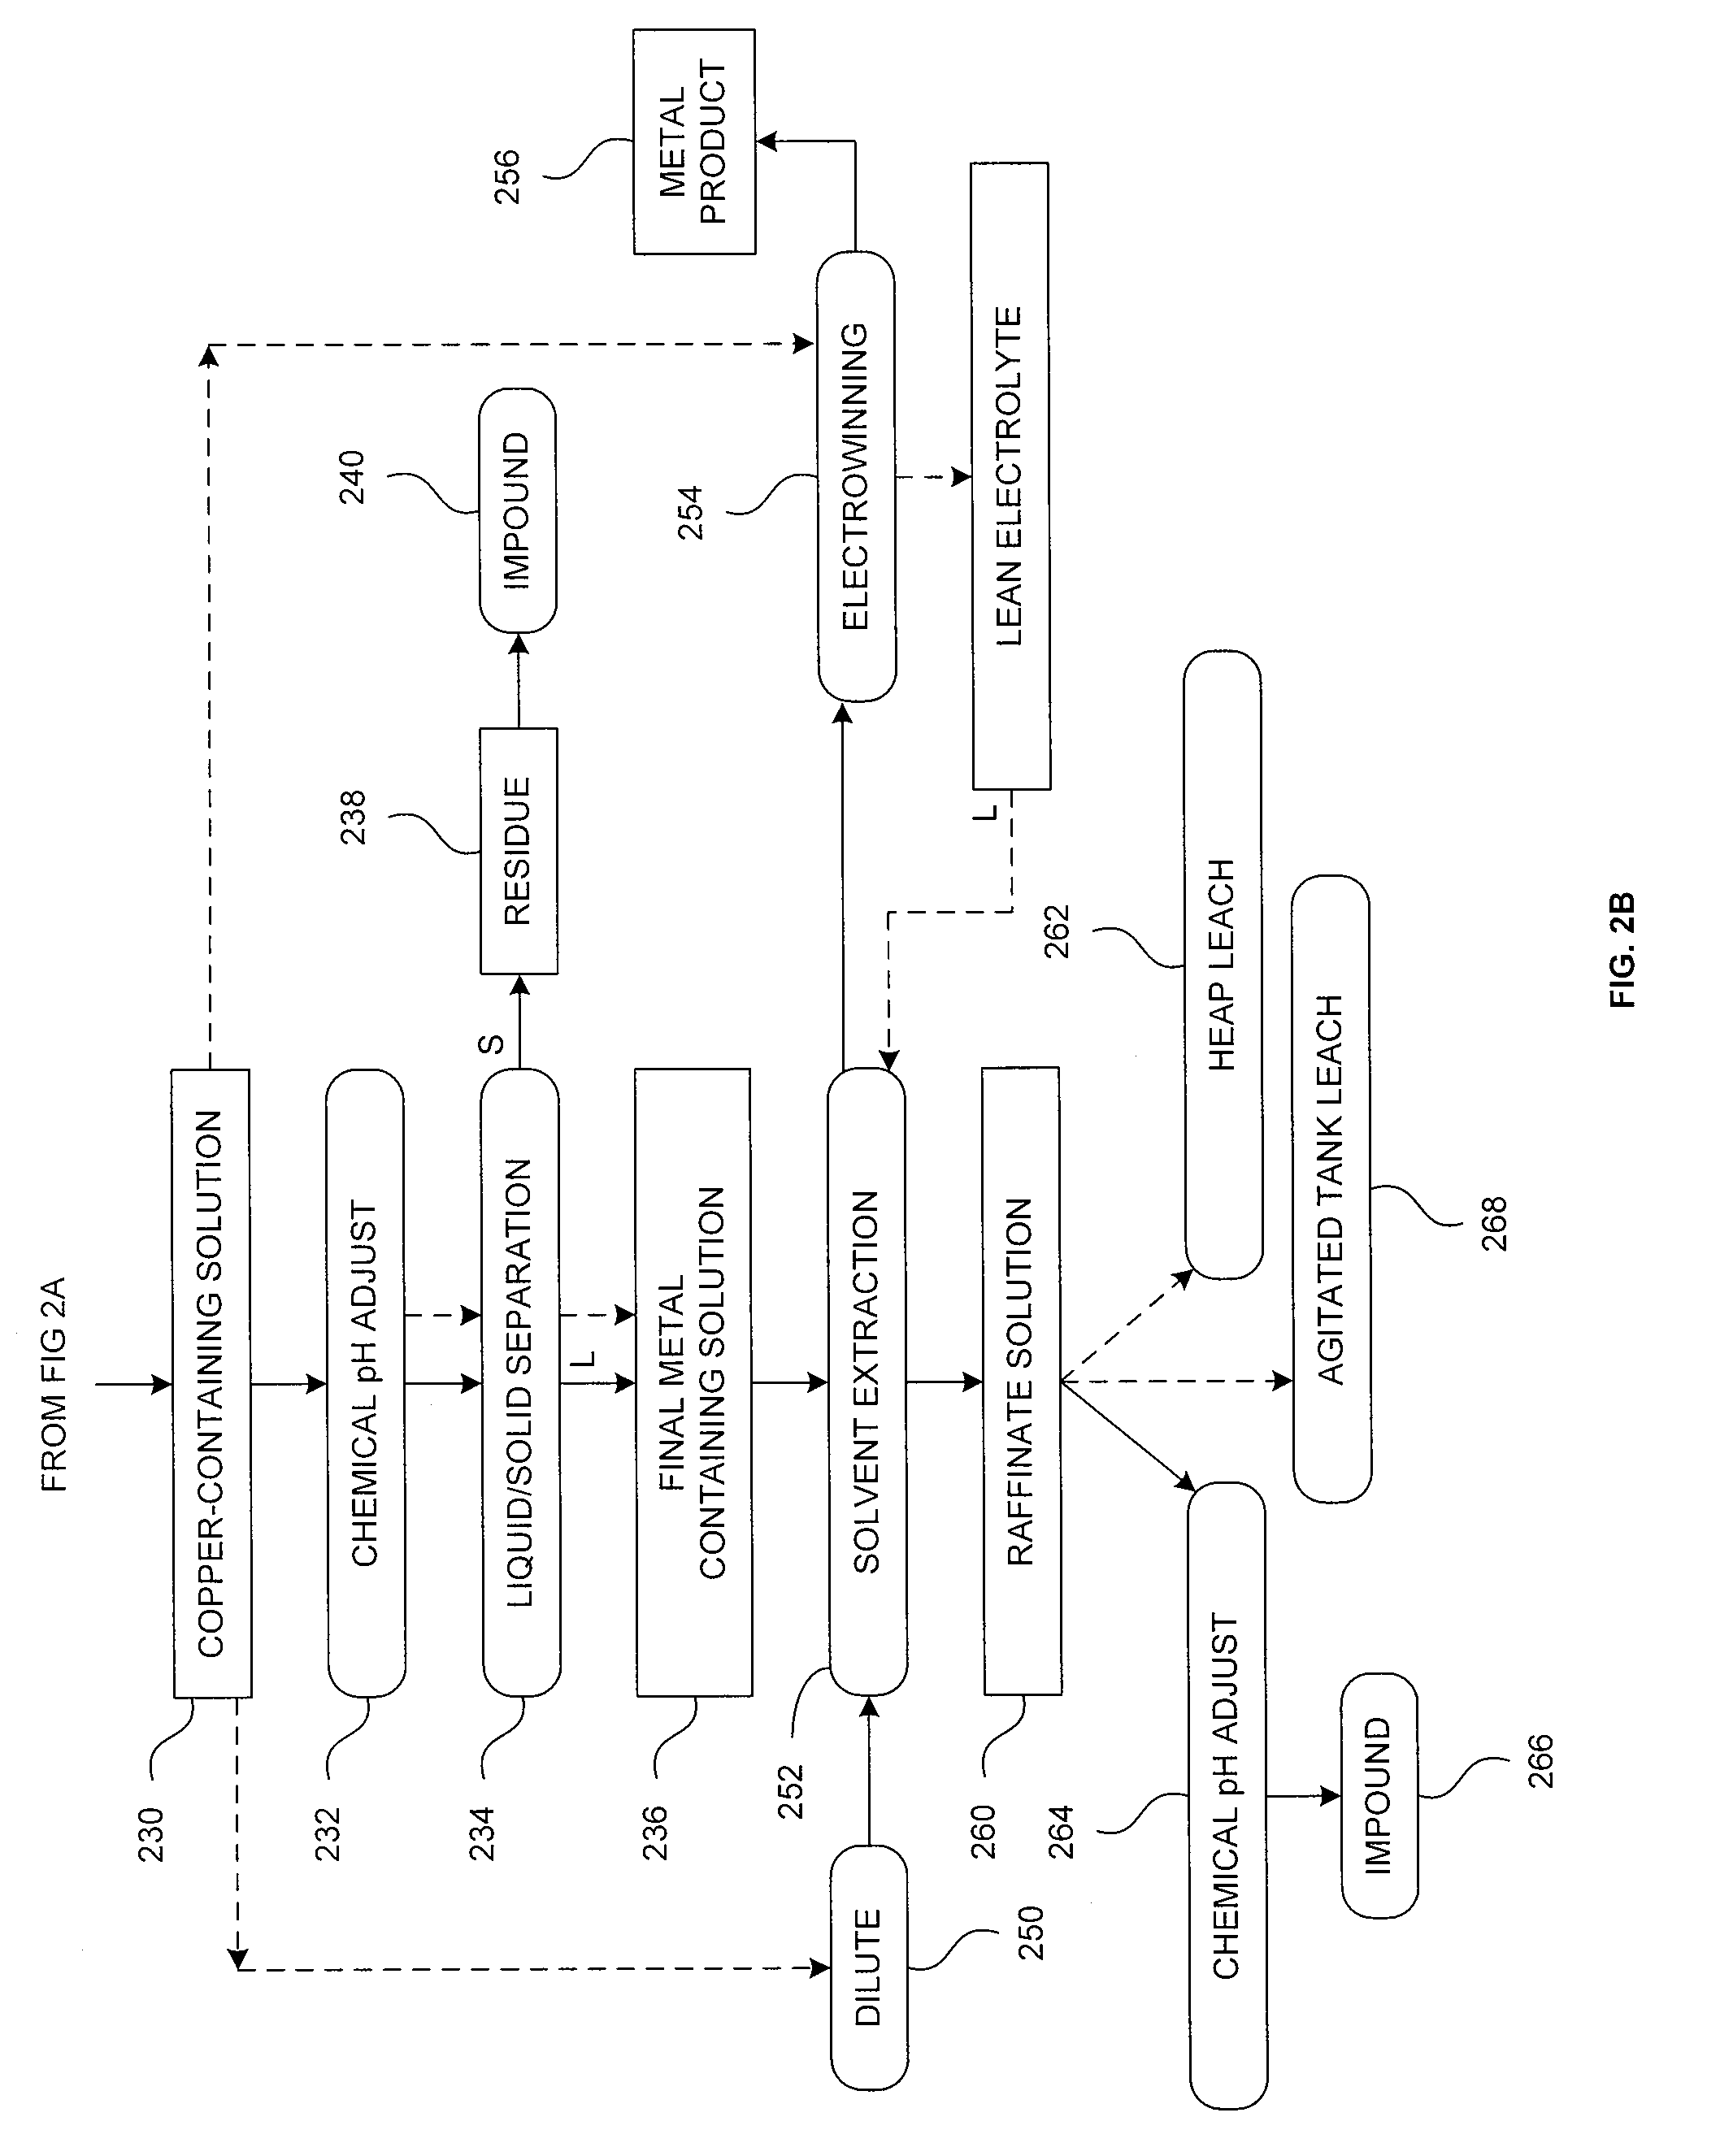 Method for recovering metal values from metal-containing materials using high temperature pressure leaching